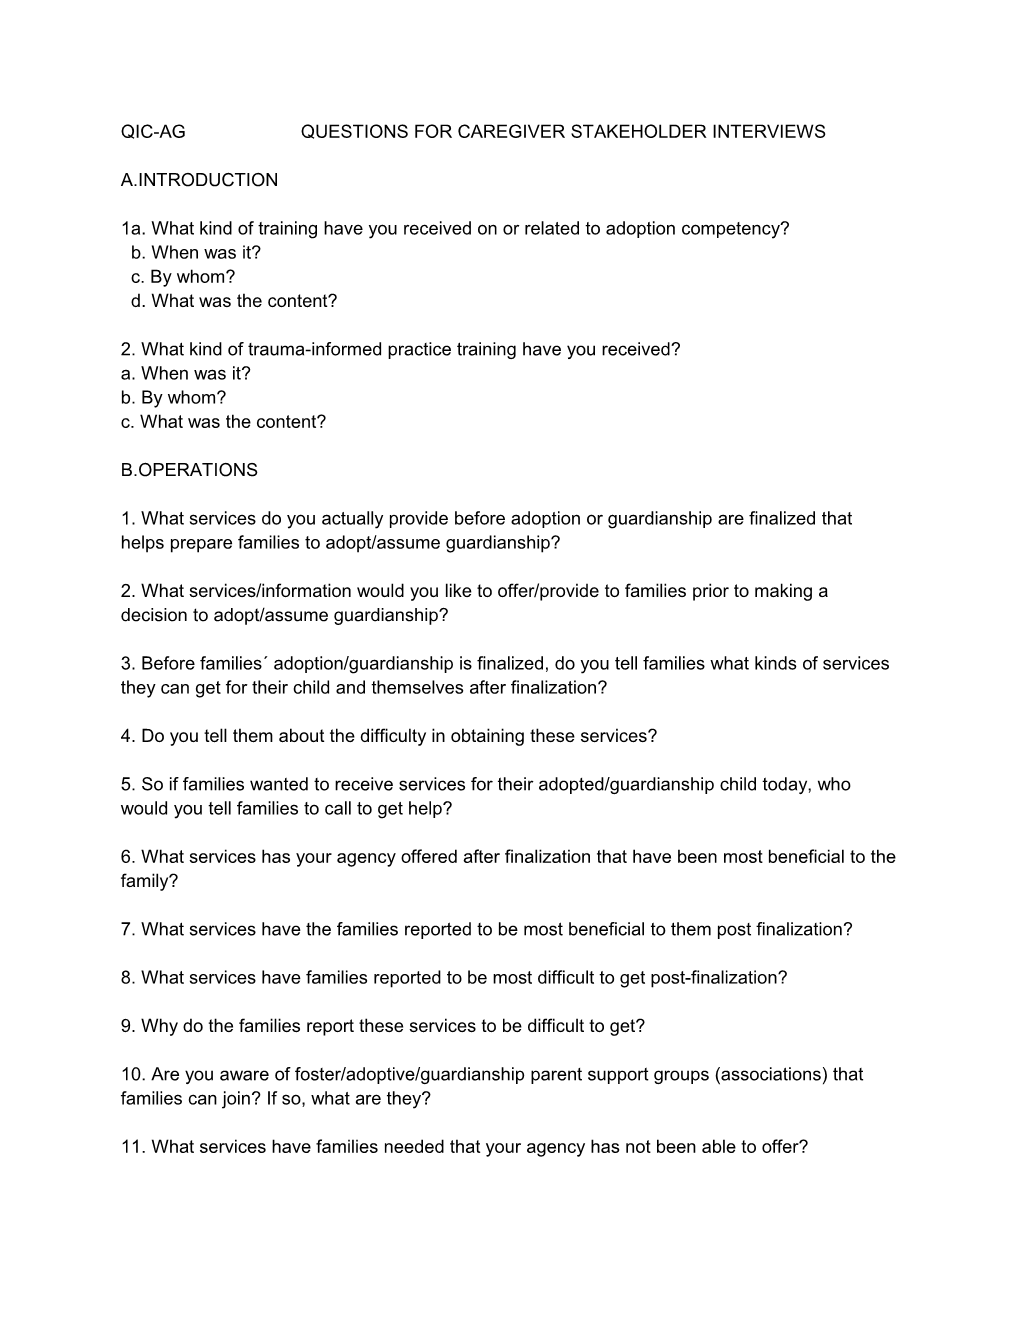 Qic-Ag Questions for Caregiver Stakeholder Interviews